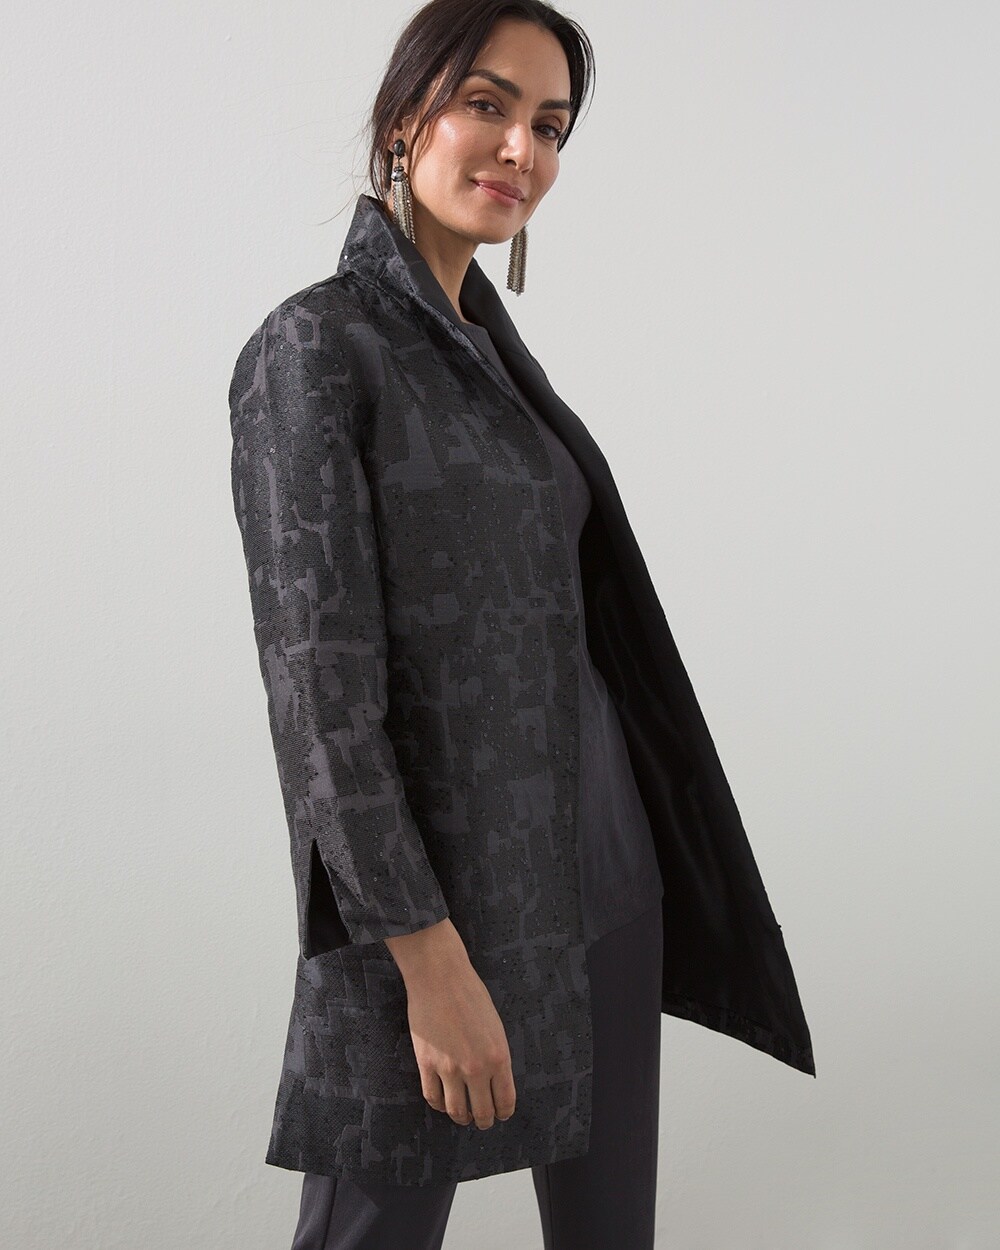 Travelers Collection Sequin Jacquard Jacket